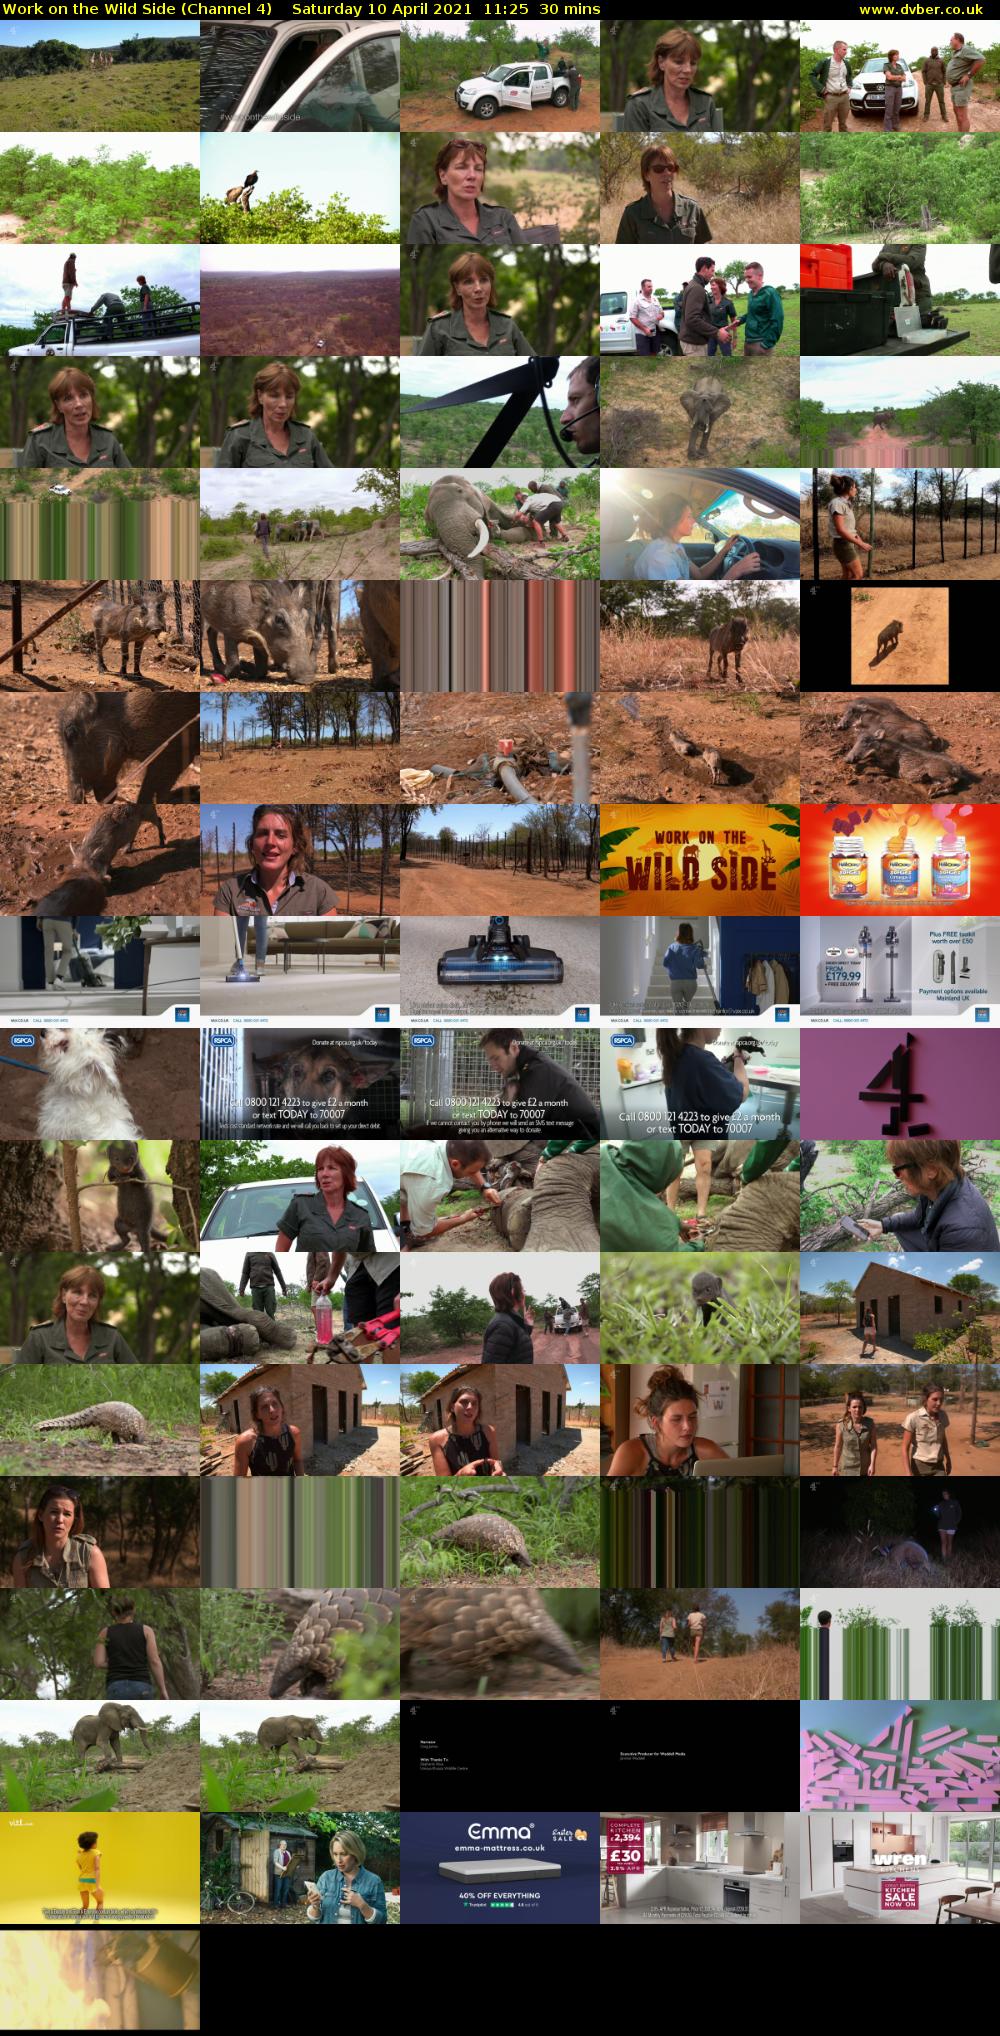 Work on the Wild Side (Channel 4) Saturday 10 April 2021 11:25 - 11:55